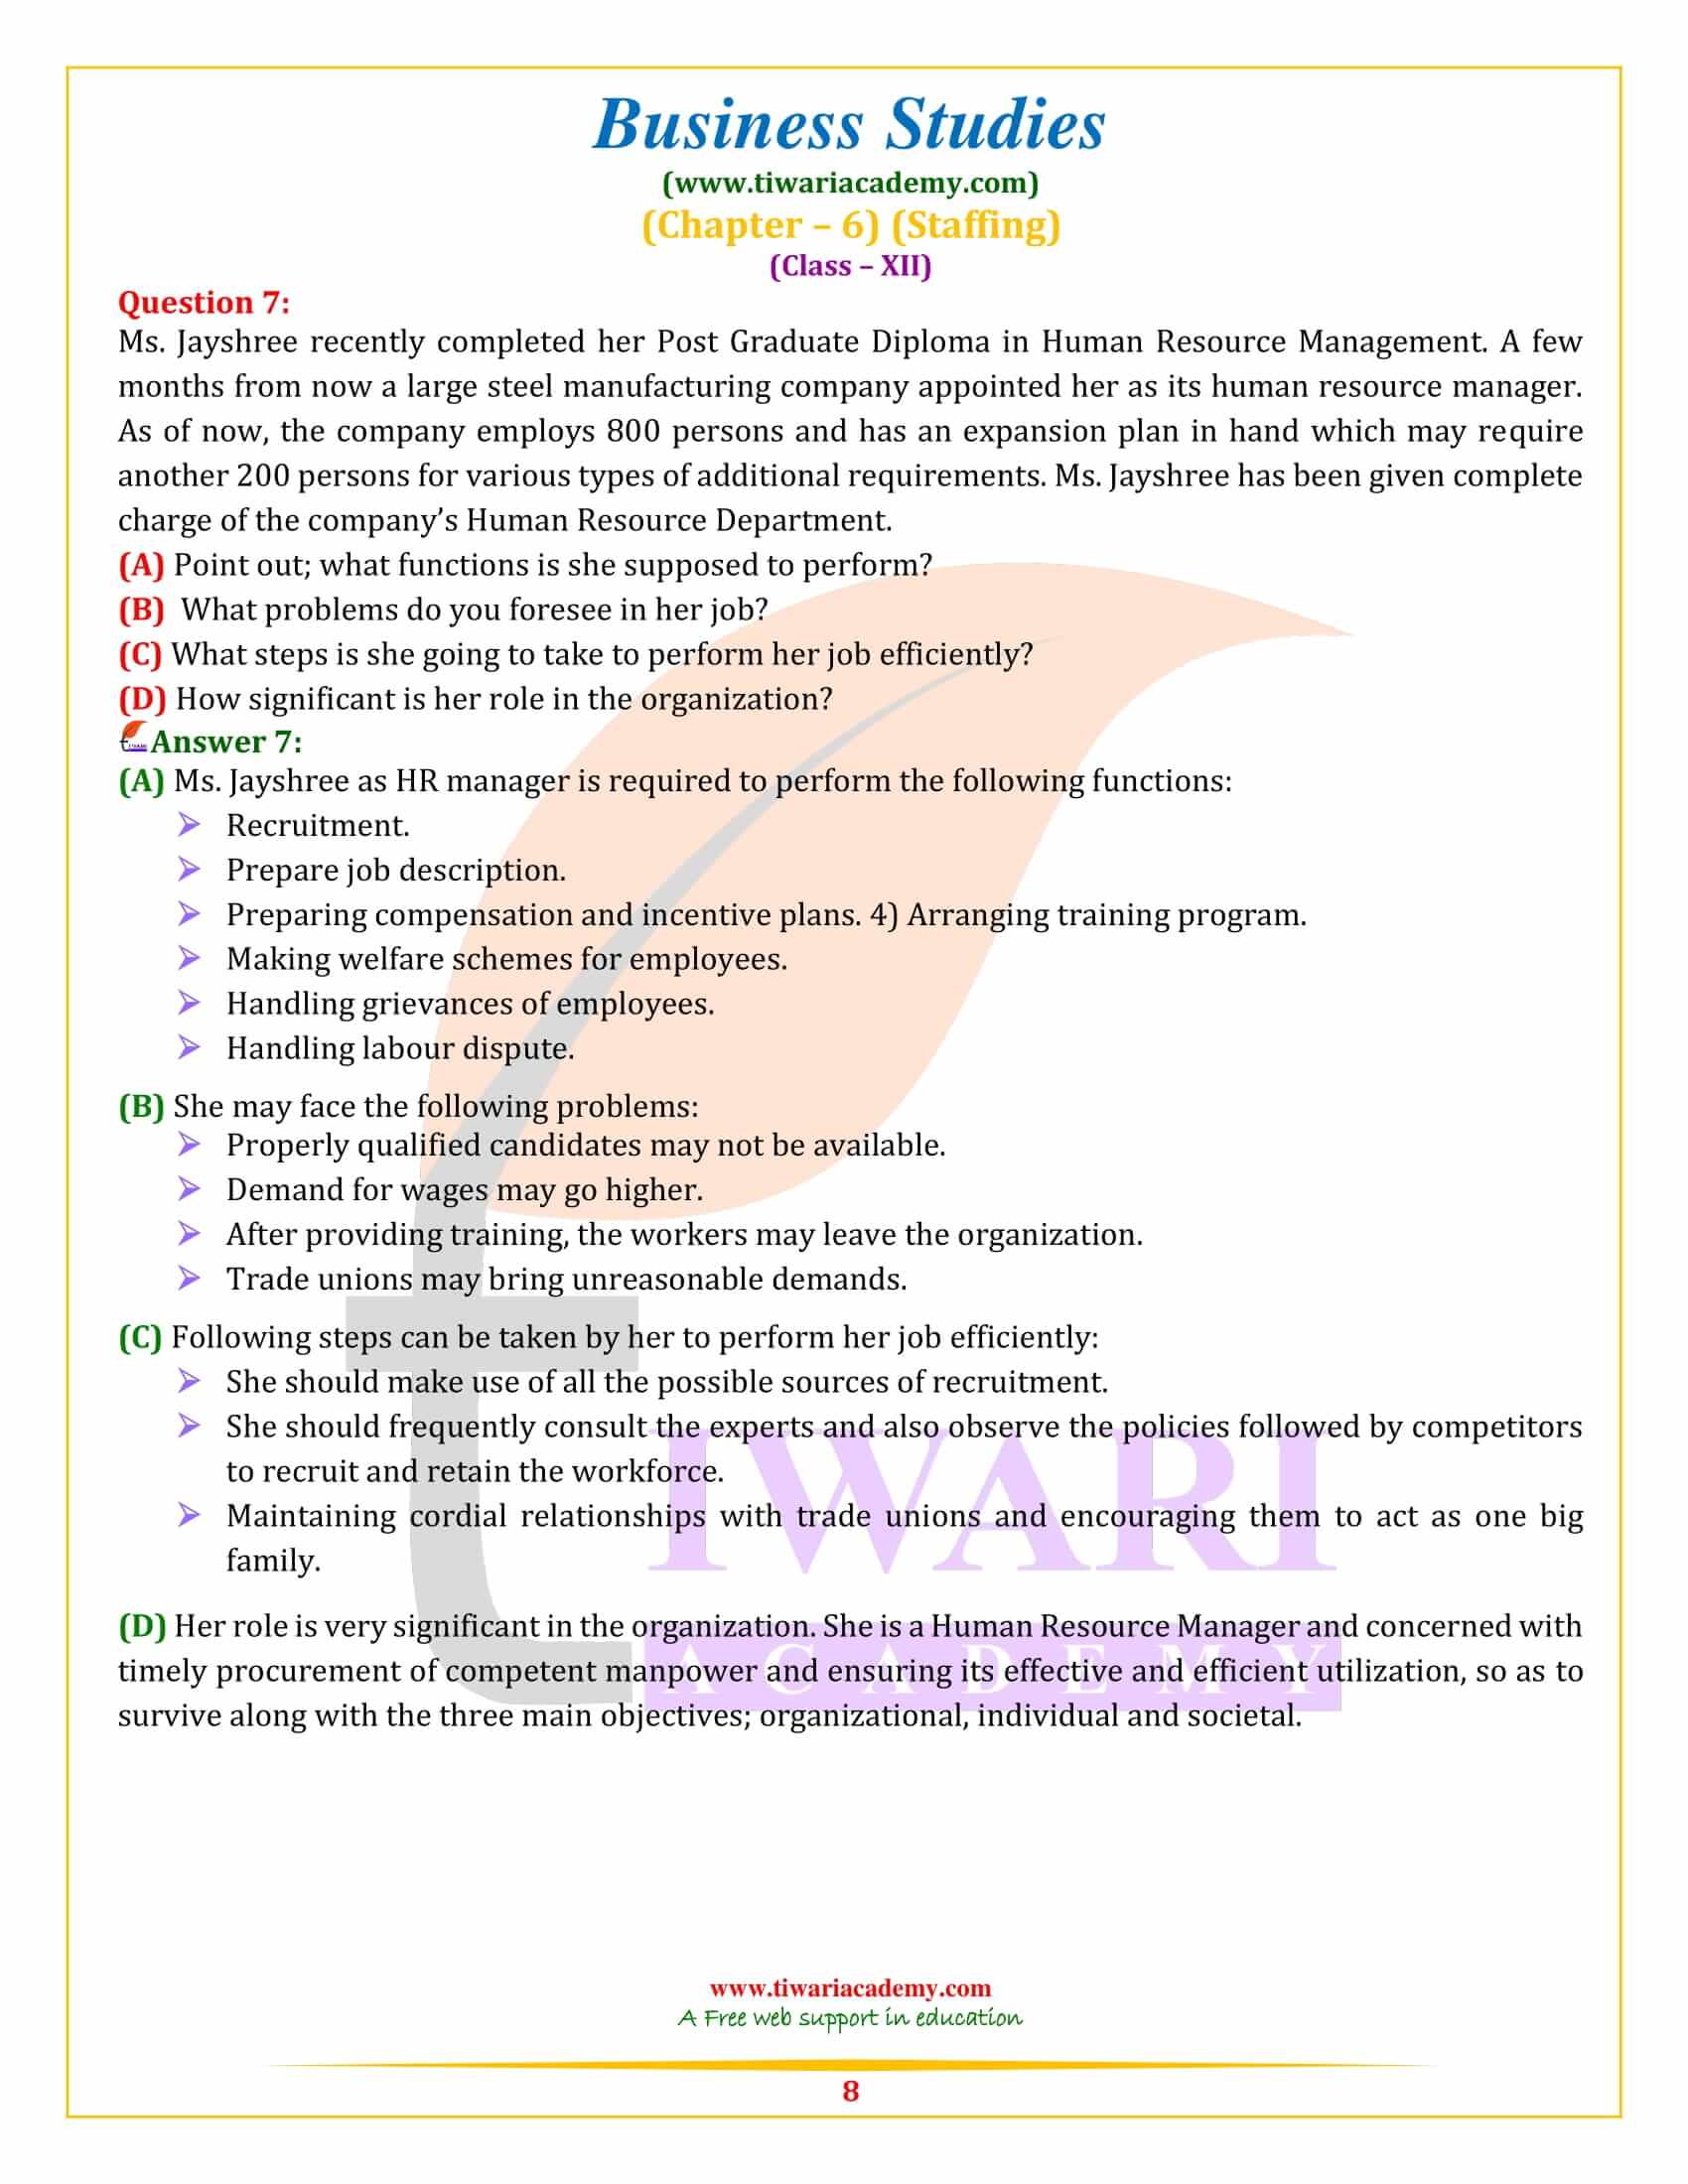 NCERT Solutions for Class 12 Business Studies Chapter 6 long answer type